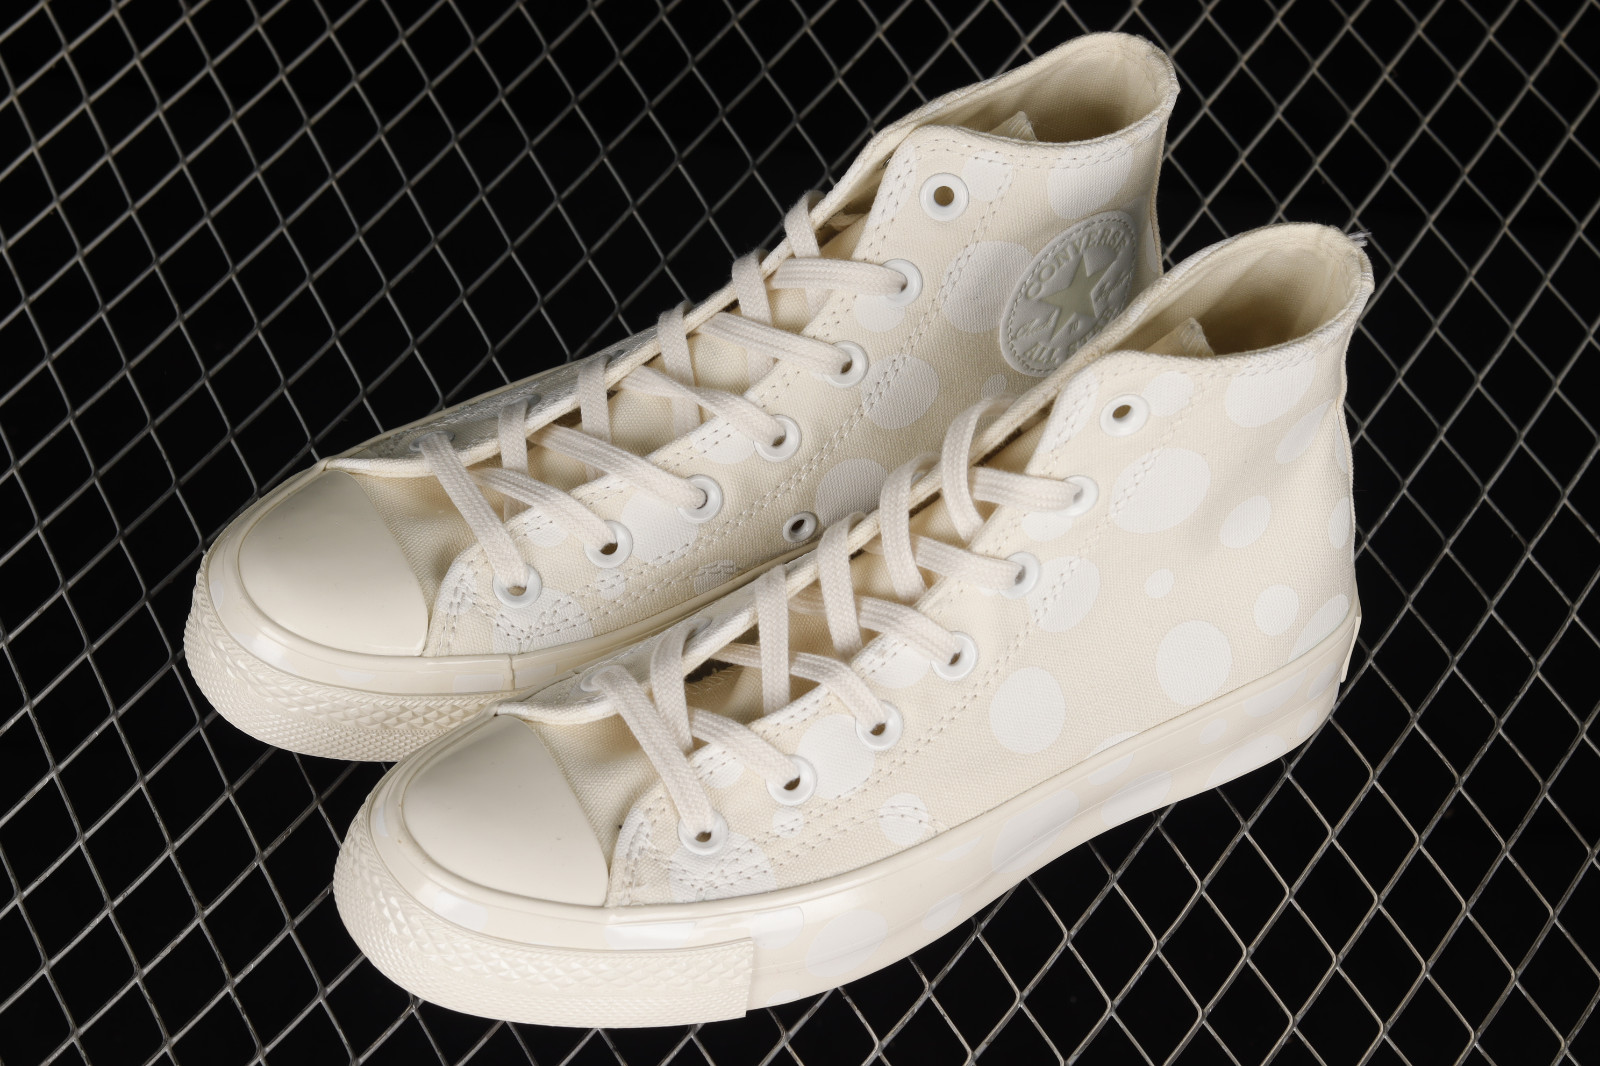 GmarShops - Converse Chuck Taylor All Star 70 High Polka Dots Shoes White A01183C - Bascheți TOMMY HILFIGER Low Cut Lace-Up Sneaker T3X4-32208-1352 M Military Green